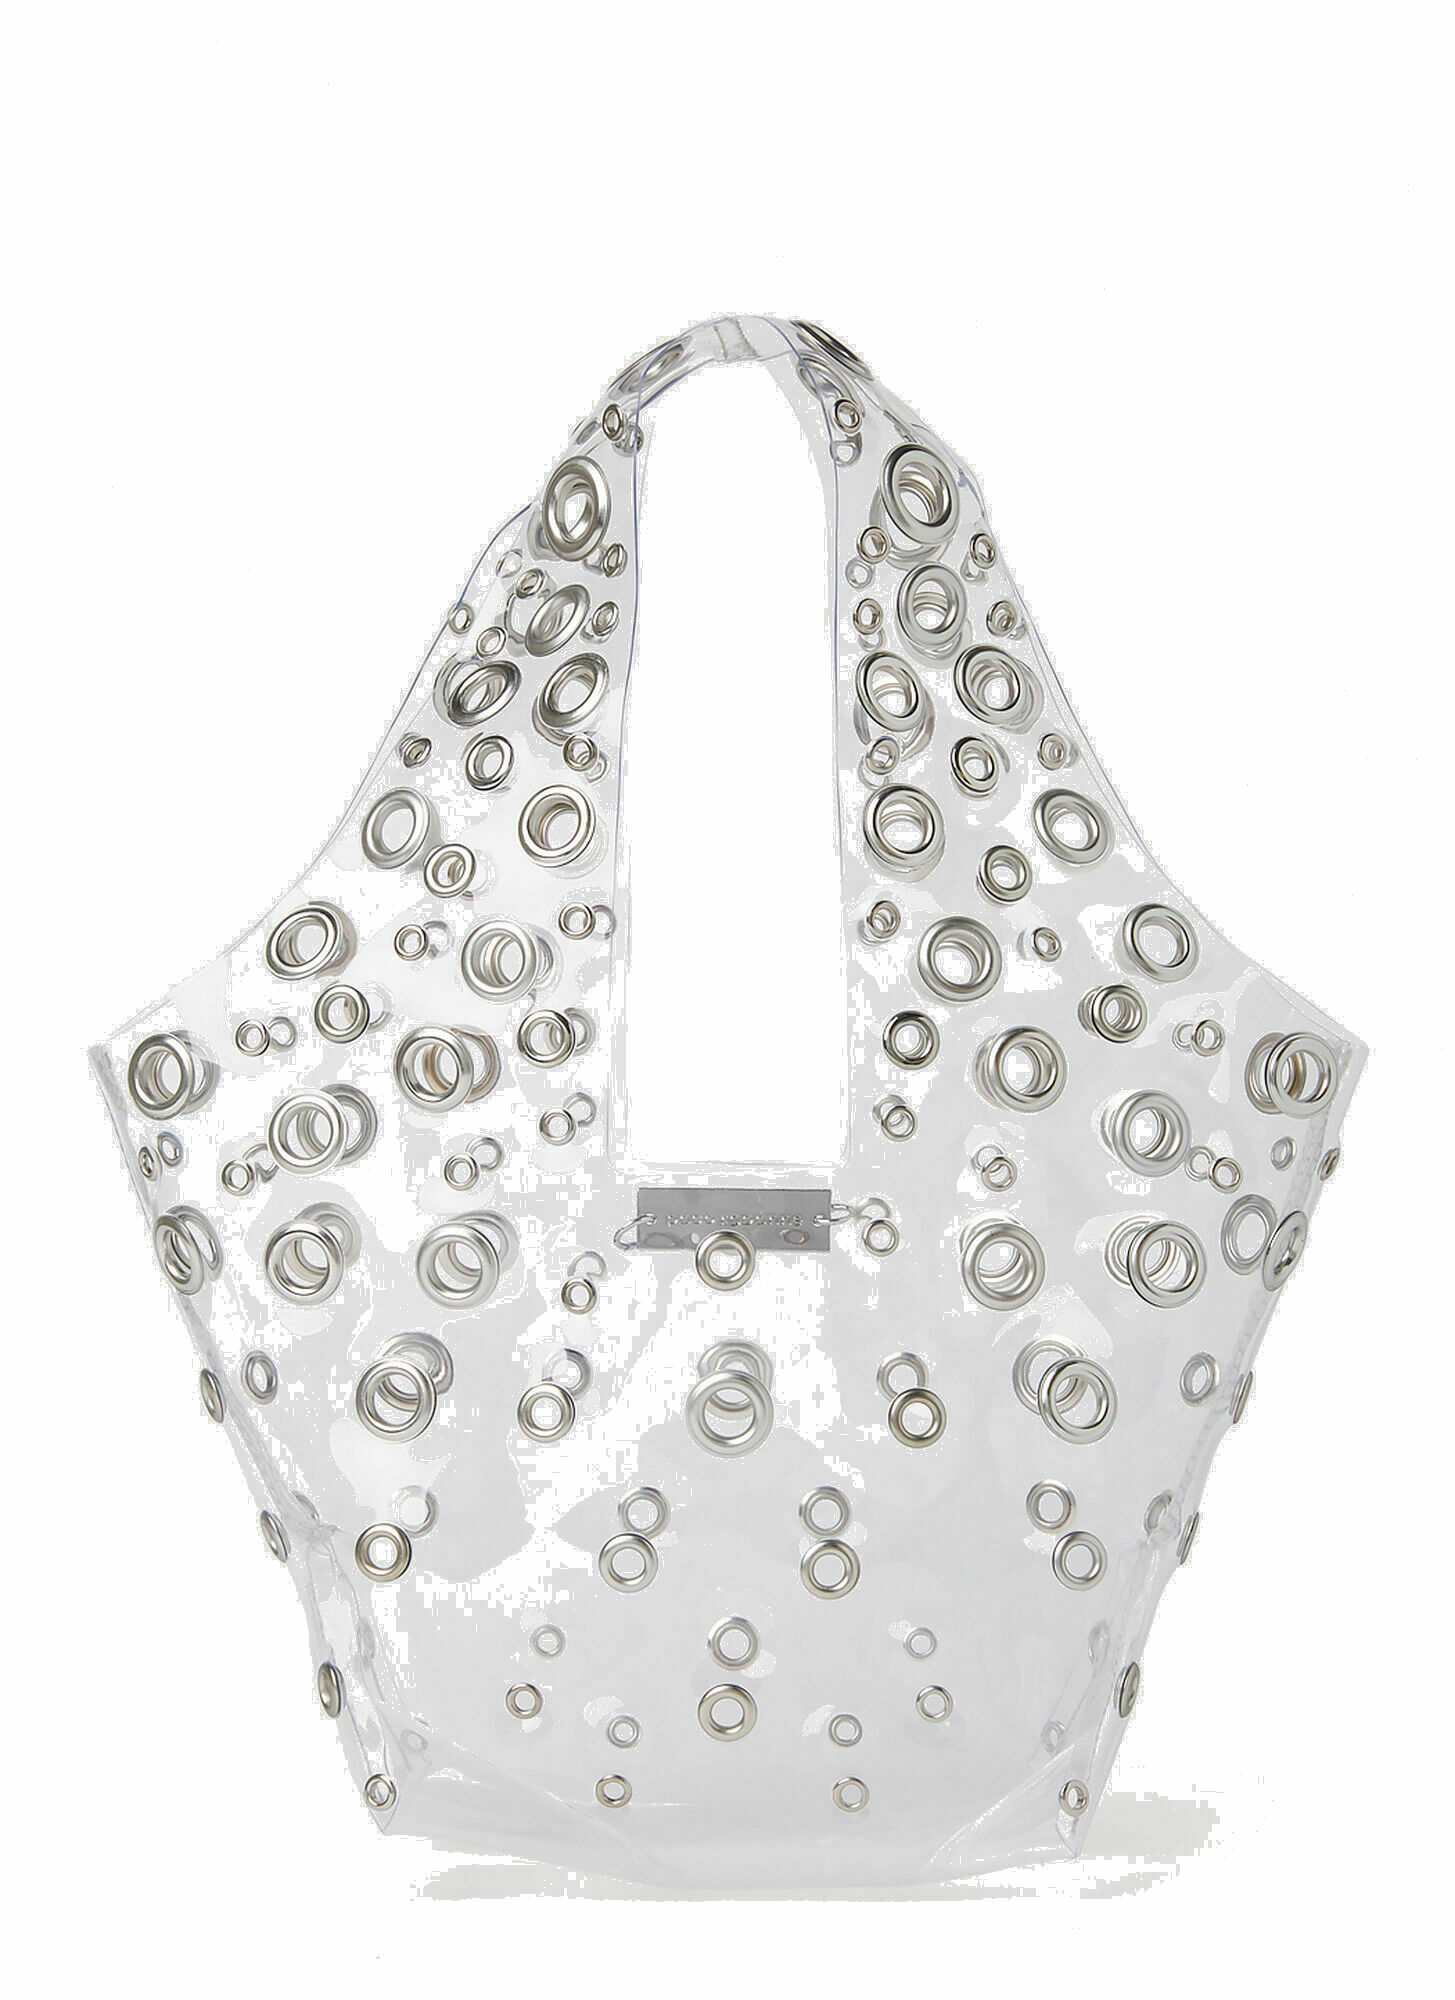 Paco Rabanne - Grommet Tote Bag in Transparent Paco Rabanne